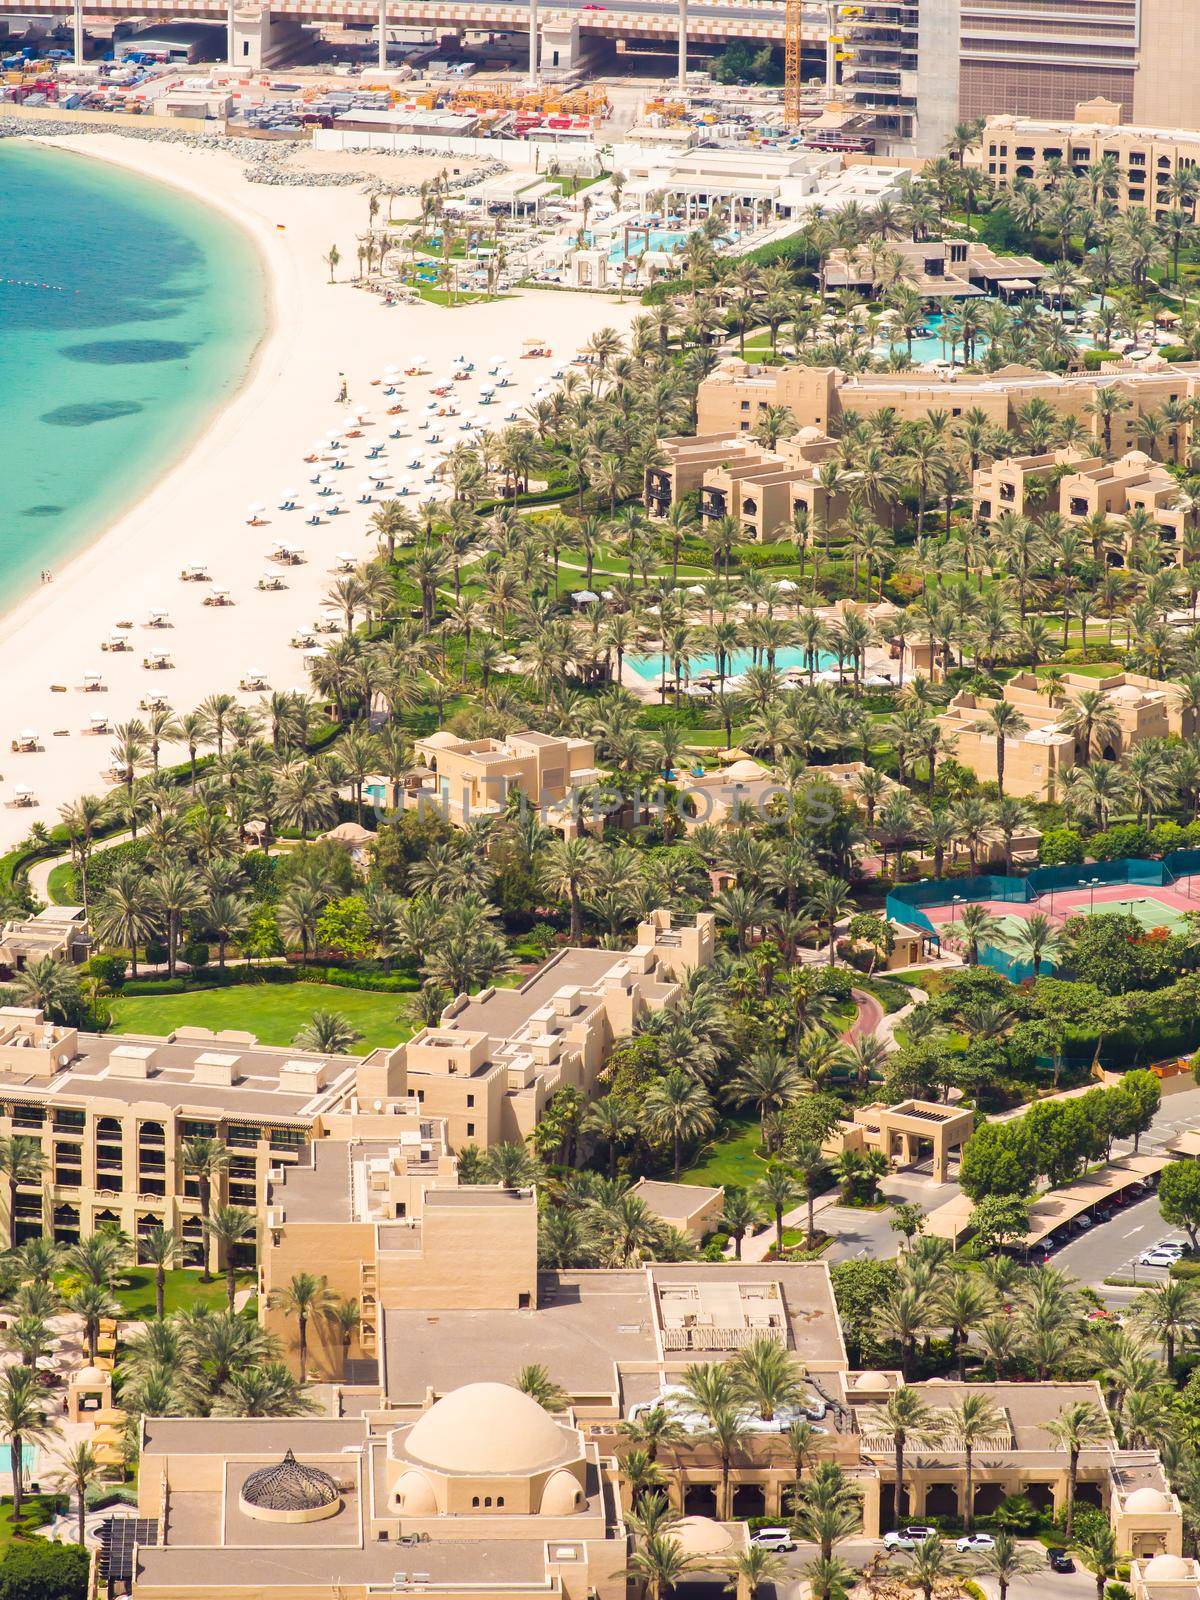 Beach coast with open pool hotels in Dubai. View from the height